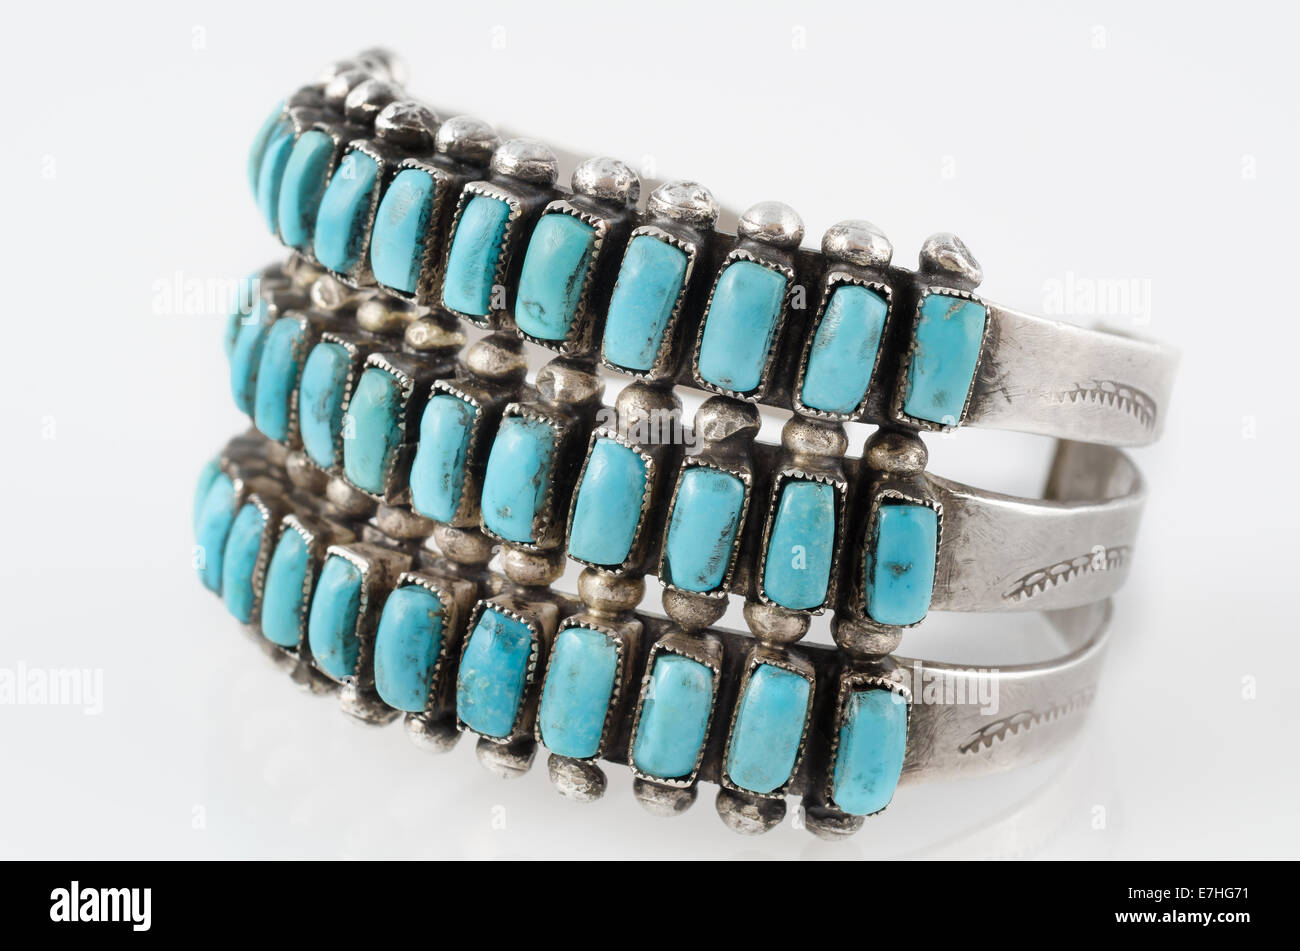 Turquoise and Silver Native American Cluster Cuff Bracelet. Stock Photo